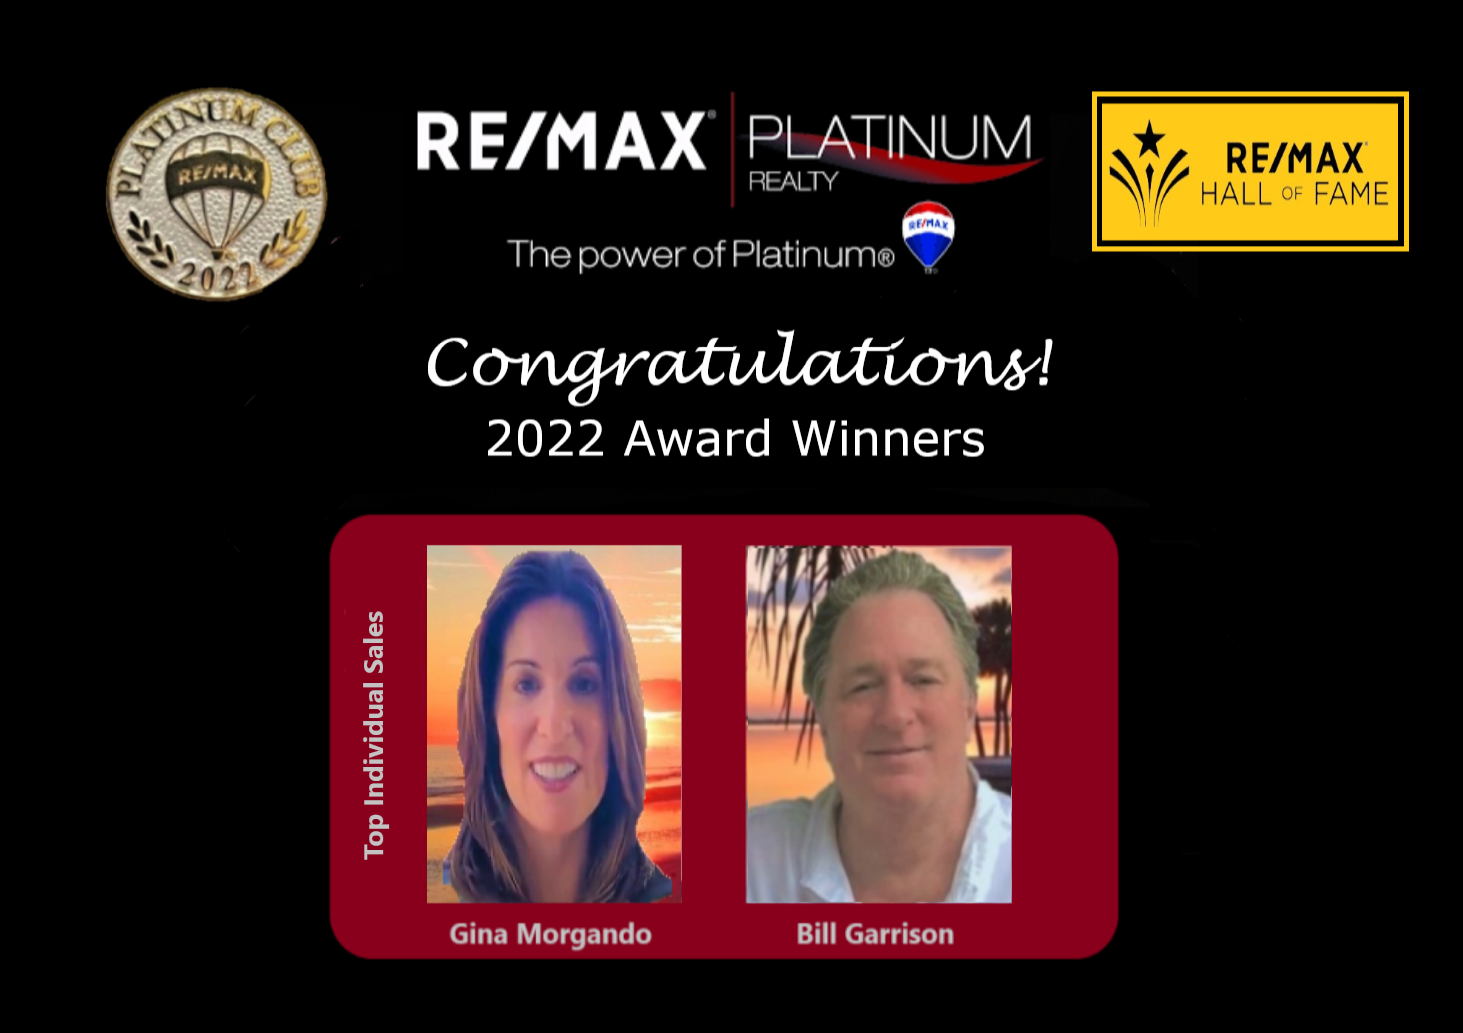 BILL GARRISON AND GINA MORGANDO AWARDED RE/MAX HALL OF FAME 